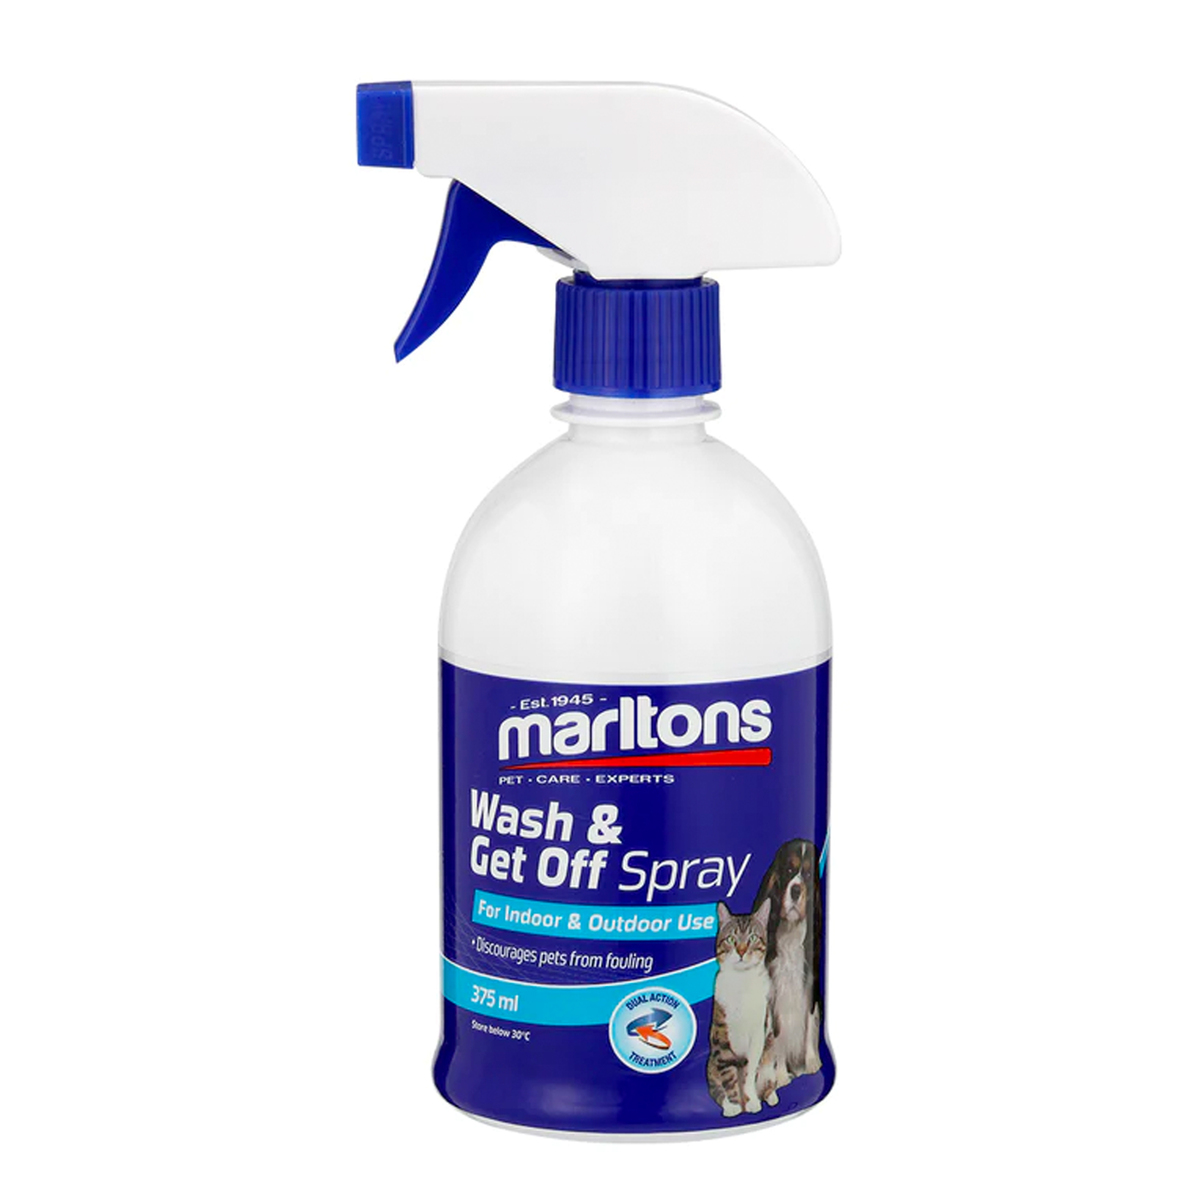 Marltons Wash and Get Off Spray 375 ml